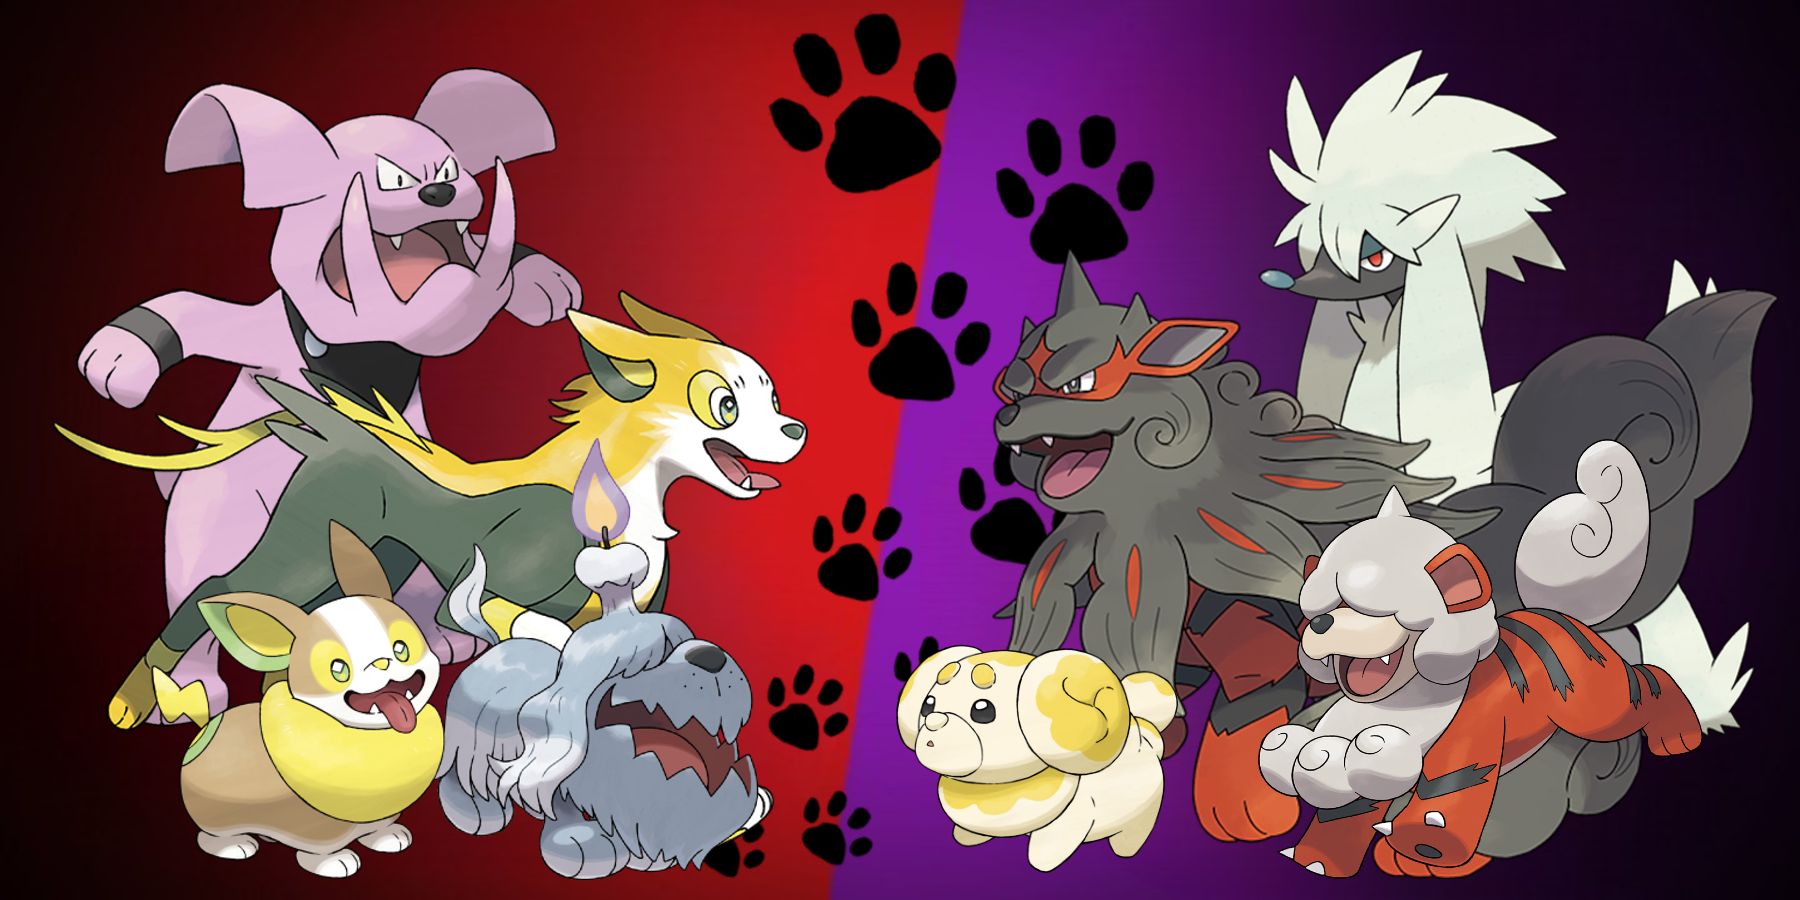 A selection of Pokemon based on or inspired by various dog breeds, including Fidough and Greavard new to Pokemon Scarlet and Violet.